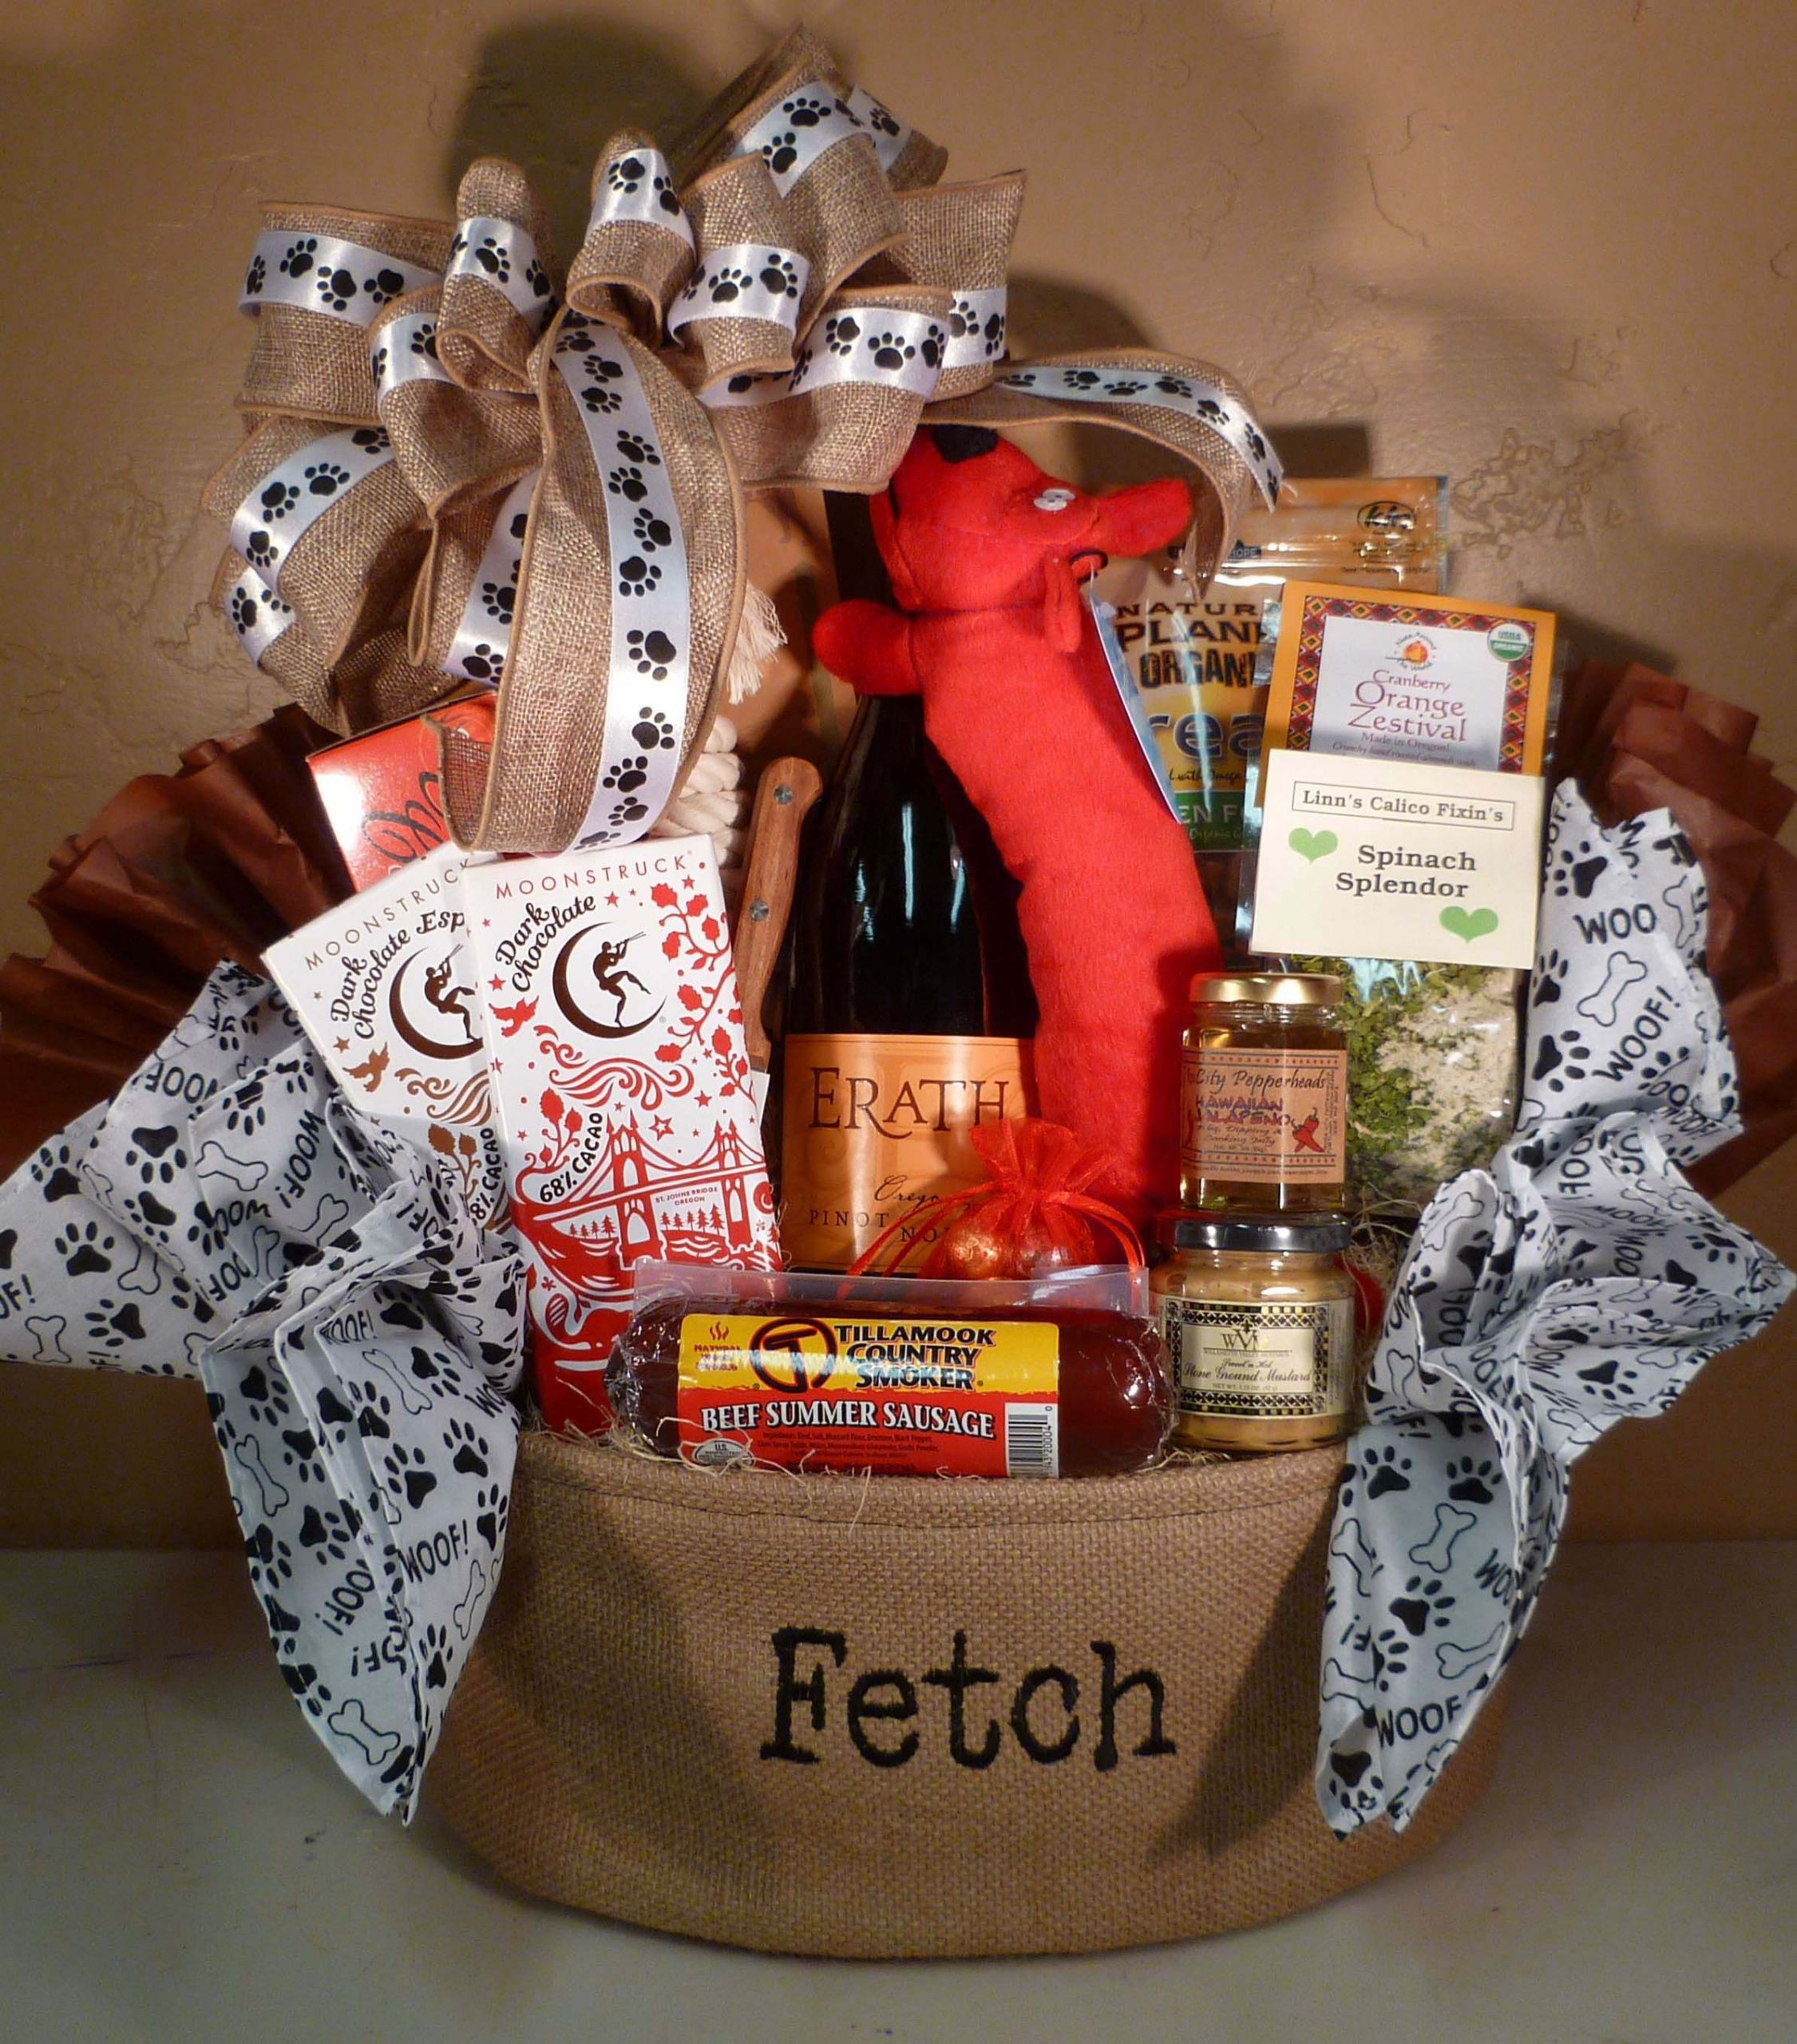 Dog Lovers Gift Basket Ideas
 Dog Themed basket for raffle idea mix of treats for